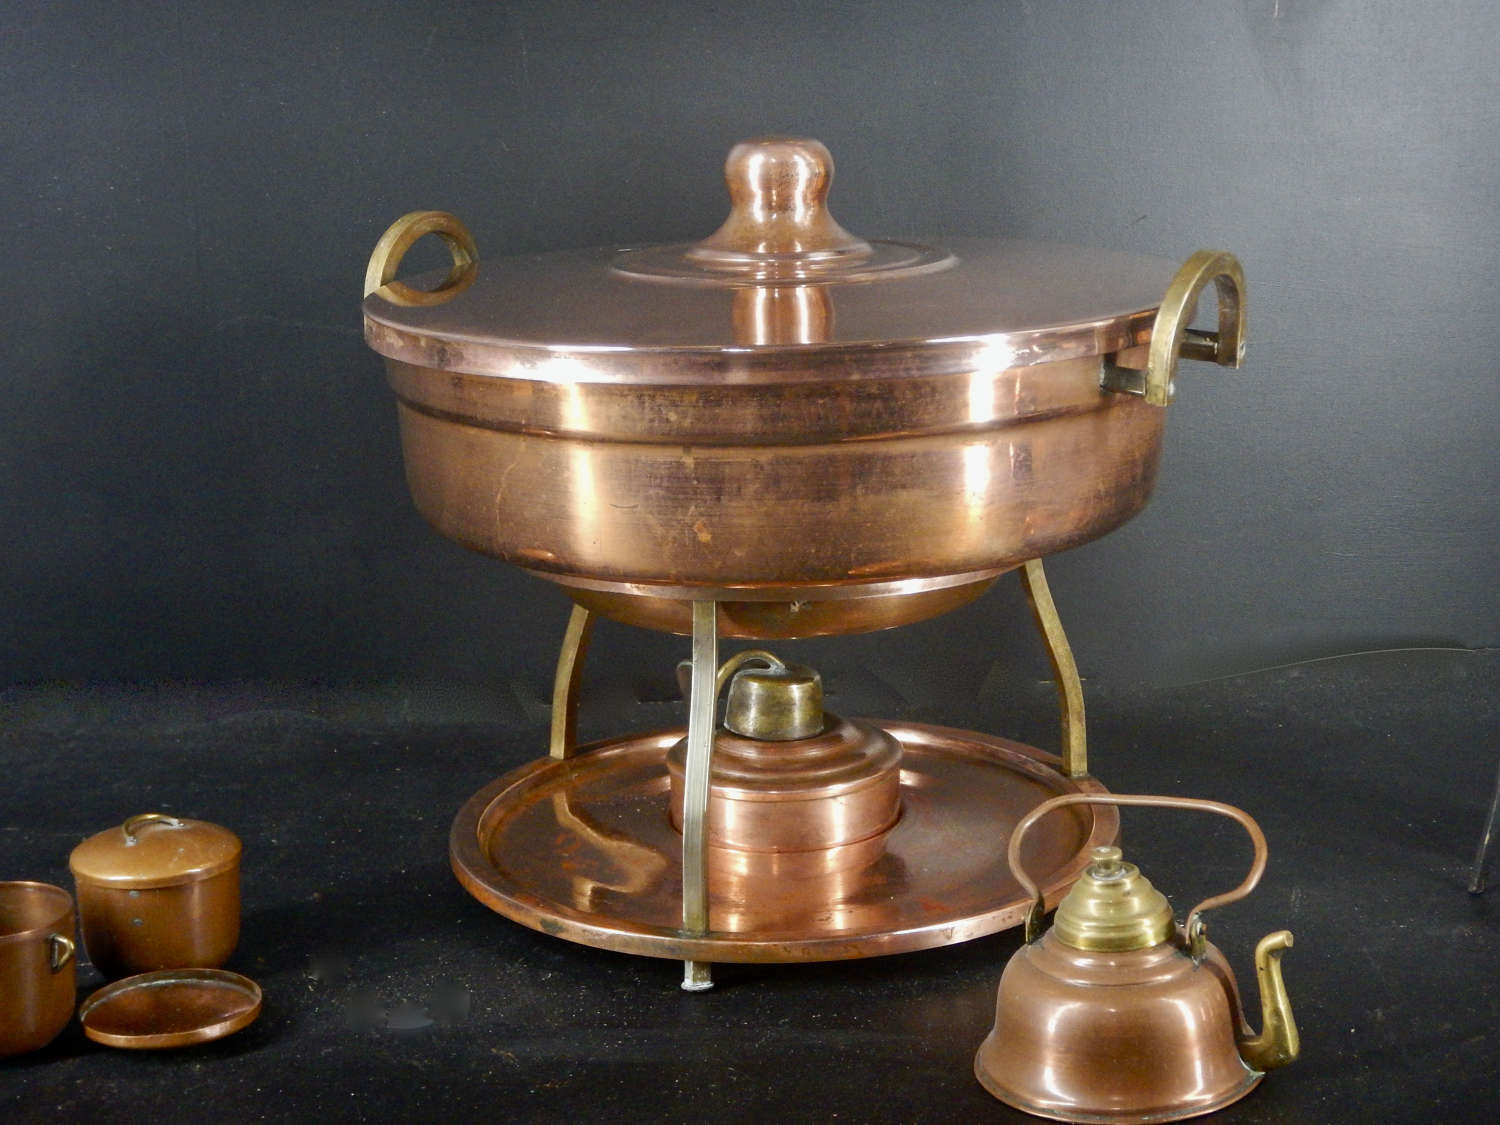 Vintage French Copper Bain Marie - Table Food Warming Dish